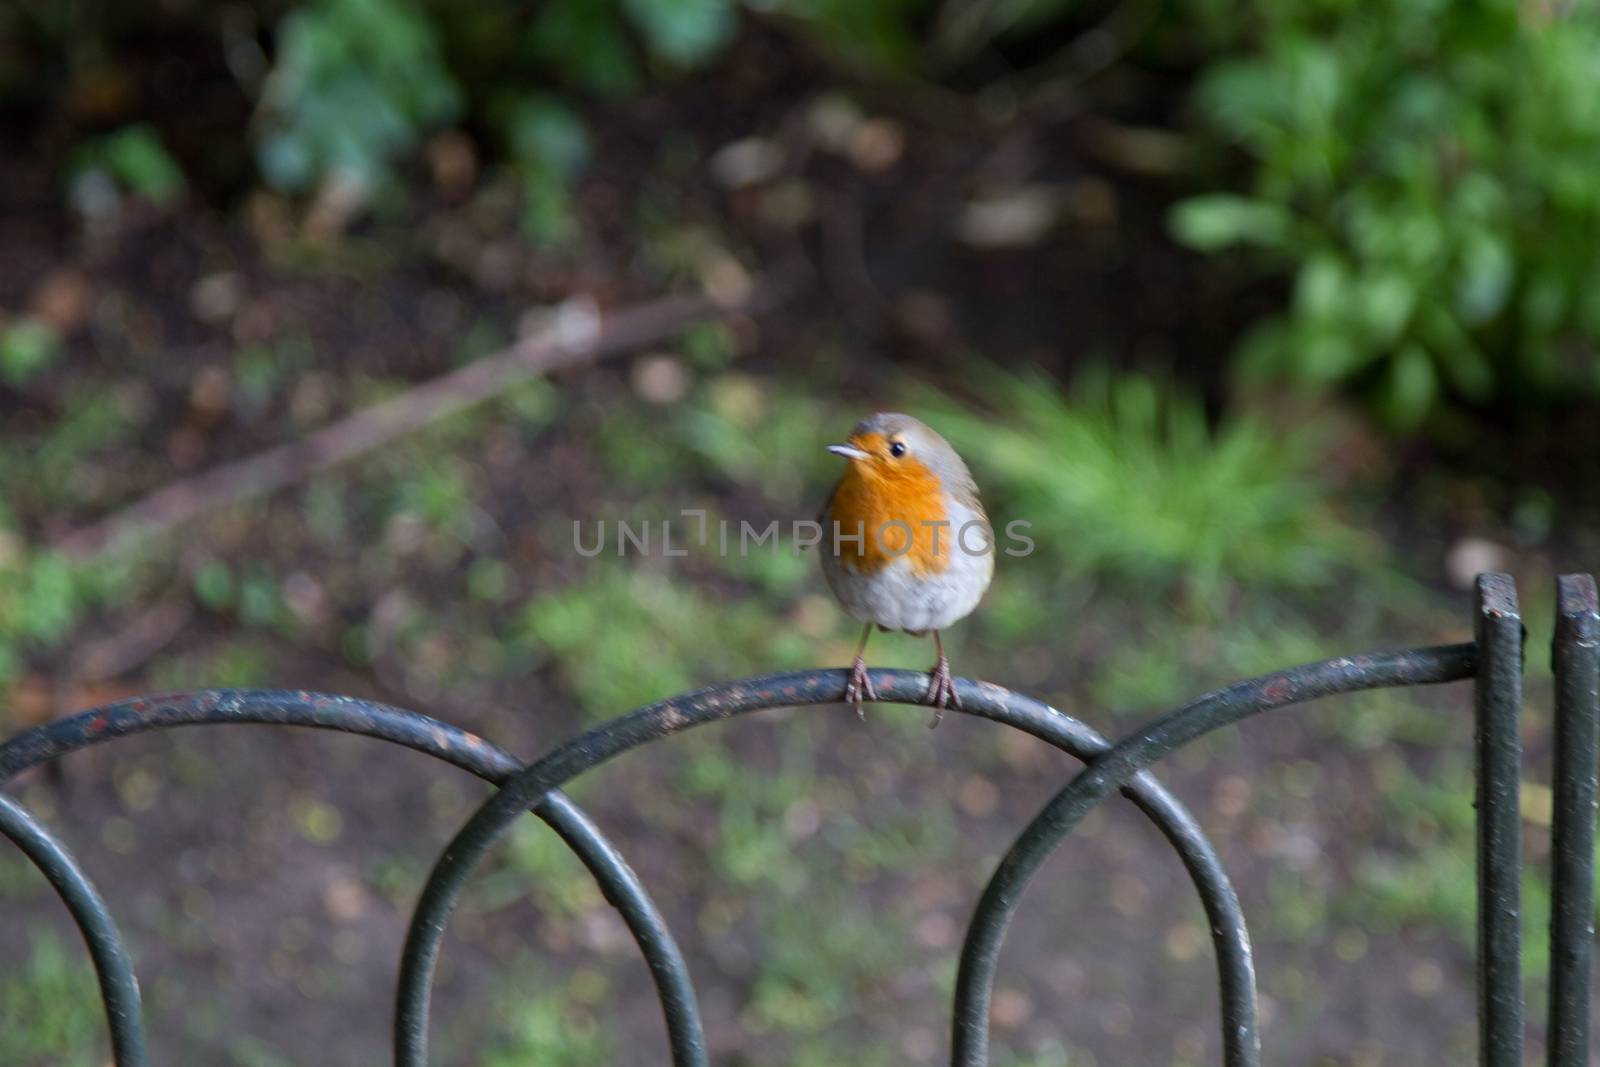 A Robin on a Fence by samULvisuals